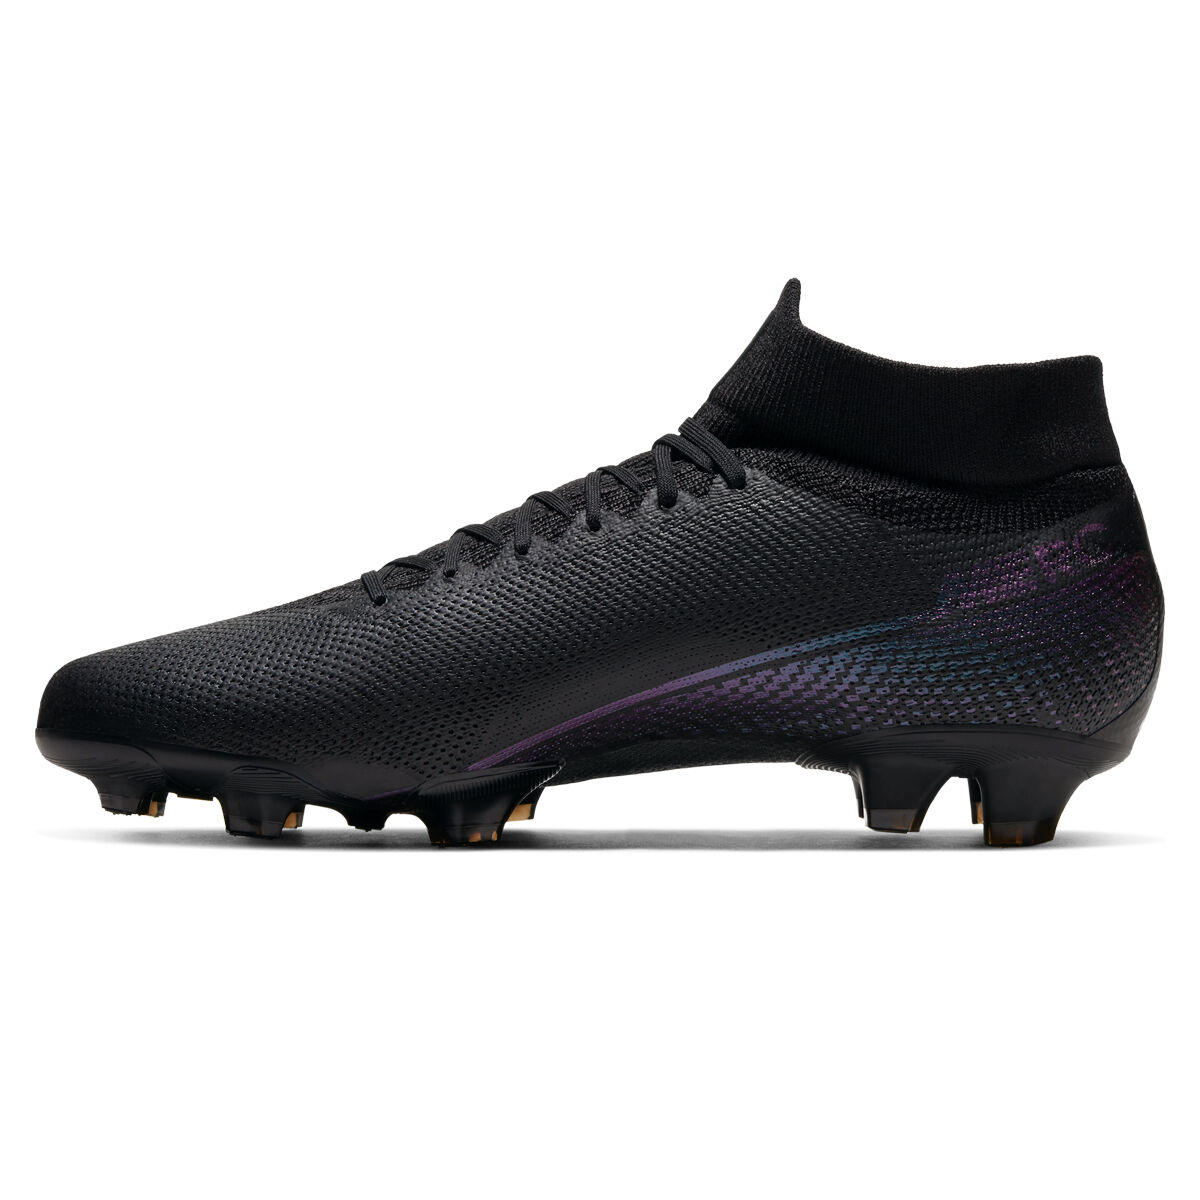 Nike Mercurial Superfly 6 Pro FG Stealth Ops Black www.